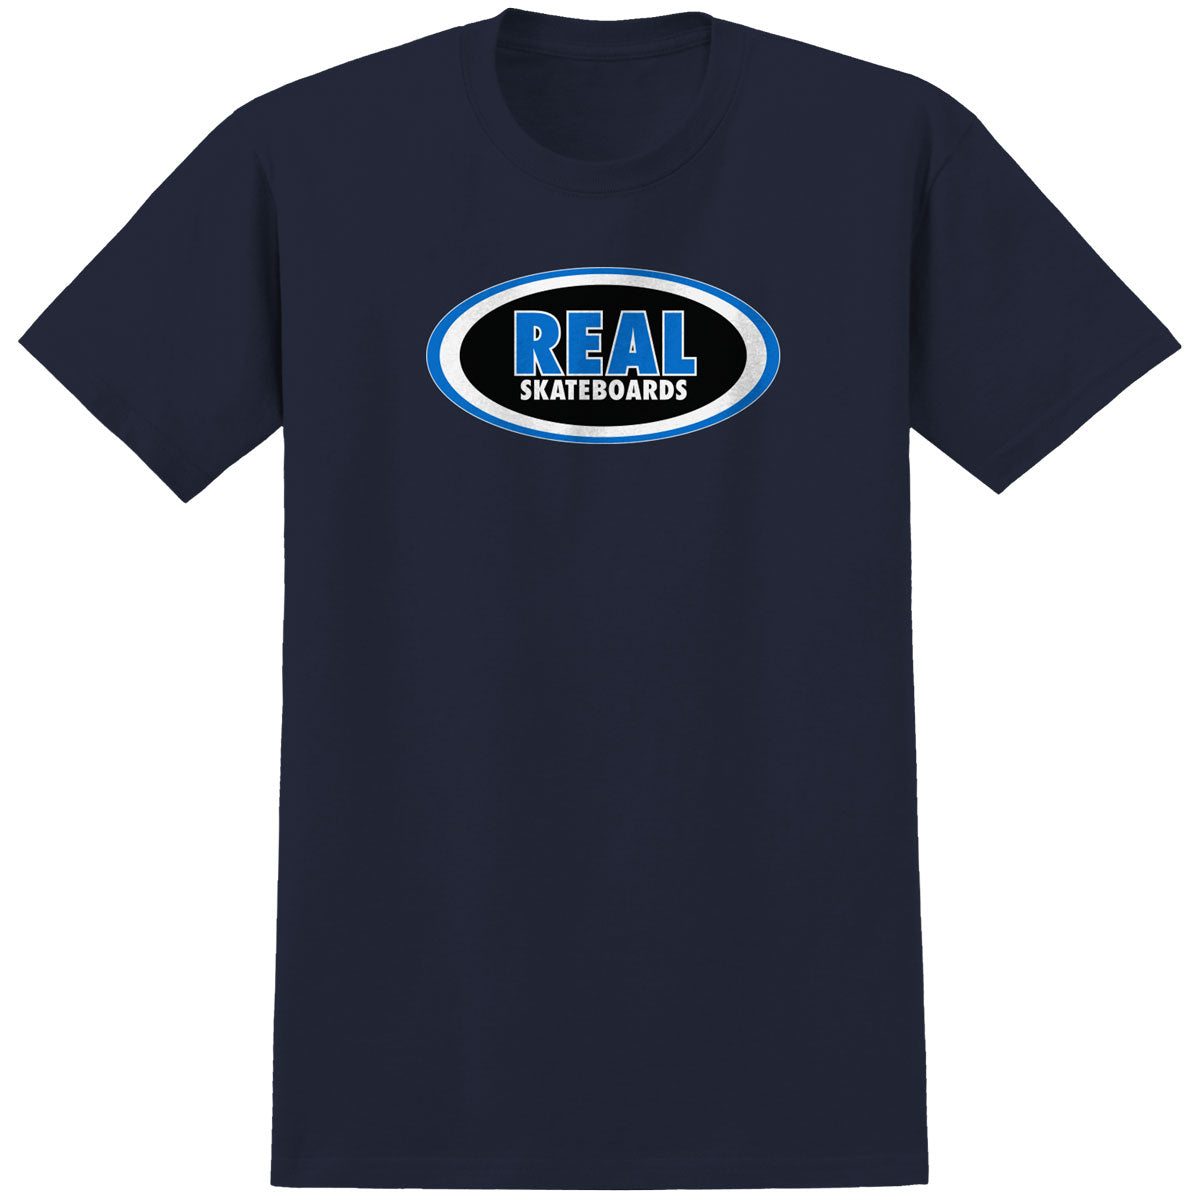 Real Oval T-Shirt - Navy/Blue/Black/White image 1